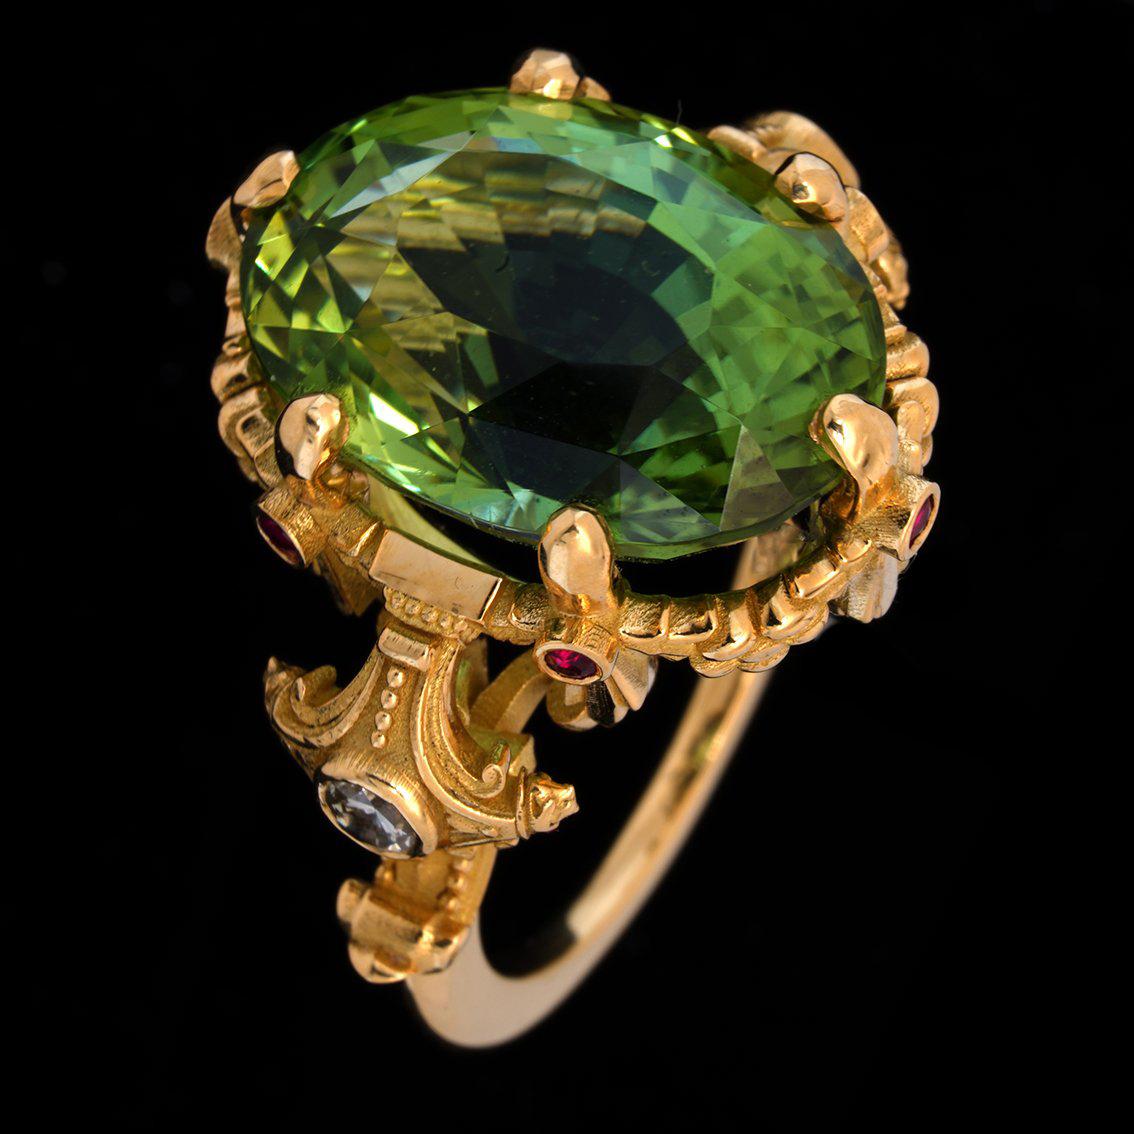 21ct Green Tourmaline, Rubies, Diamonds, & 18k Yellow Gold Antique Style Ring For Sale 7